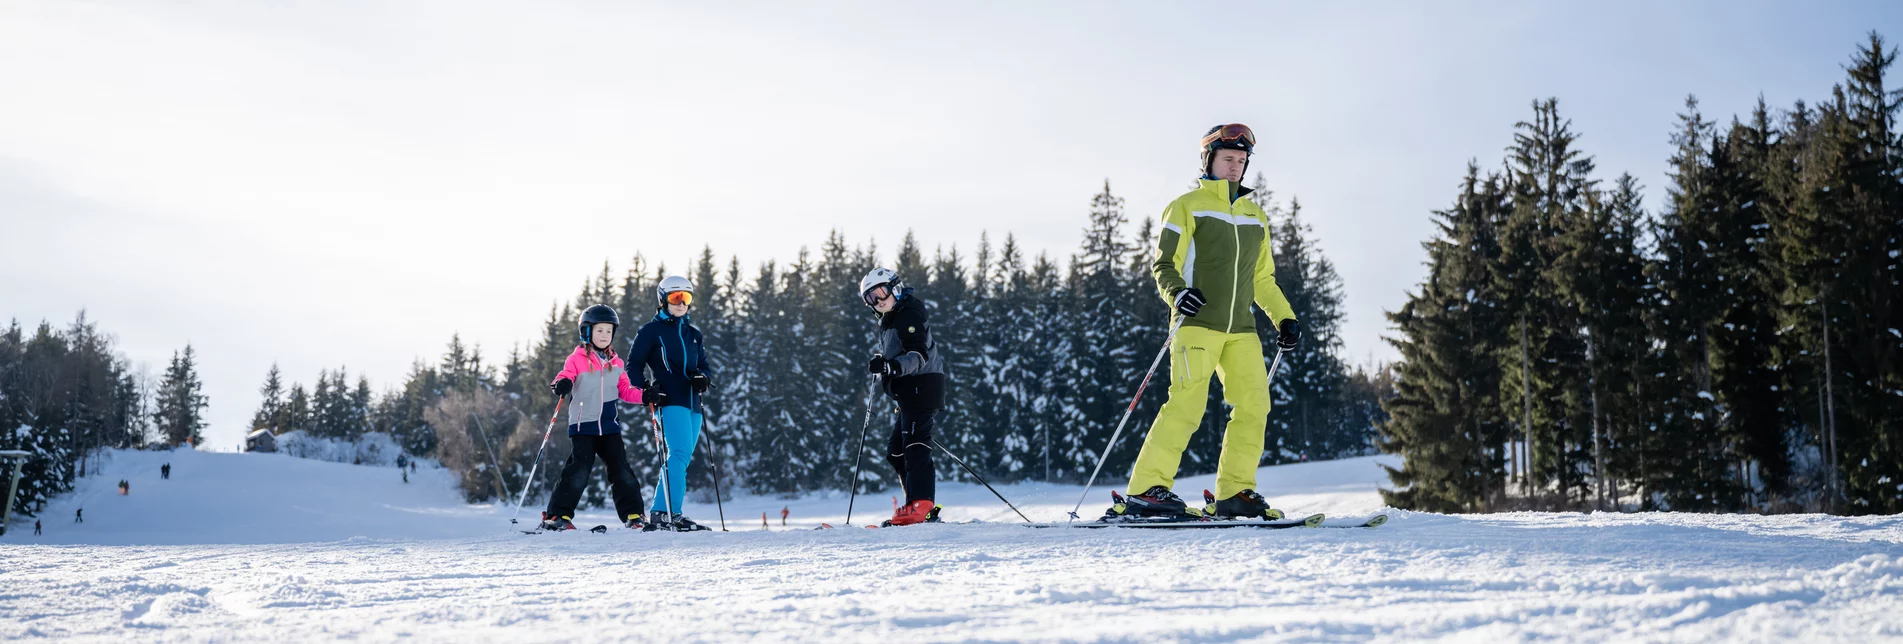 Skiing with the whole family in Eastern Styria | © (c) Klaus Ranger | Klaus Ranger